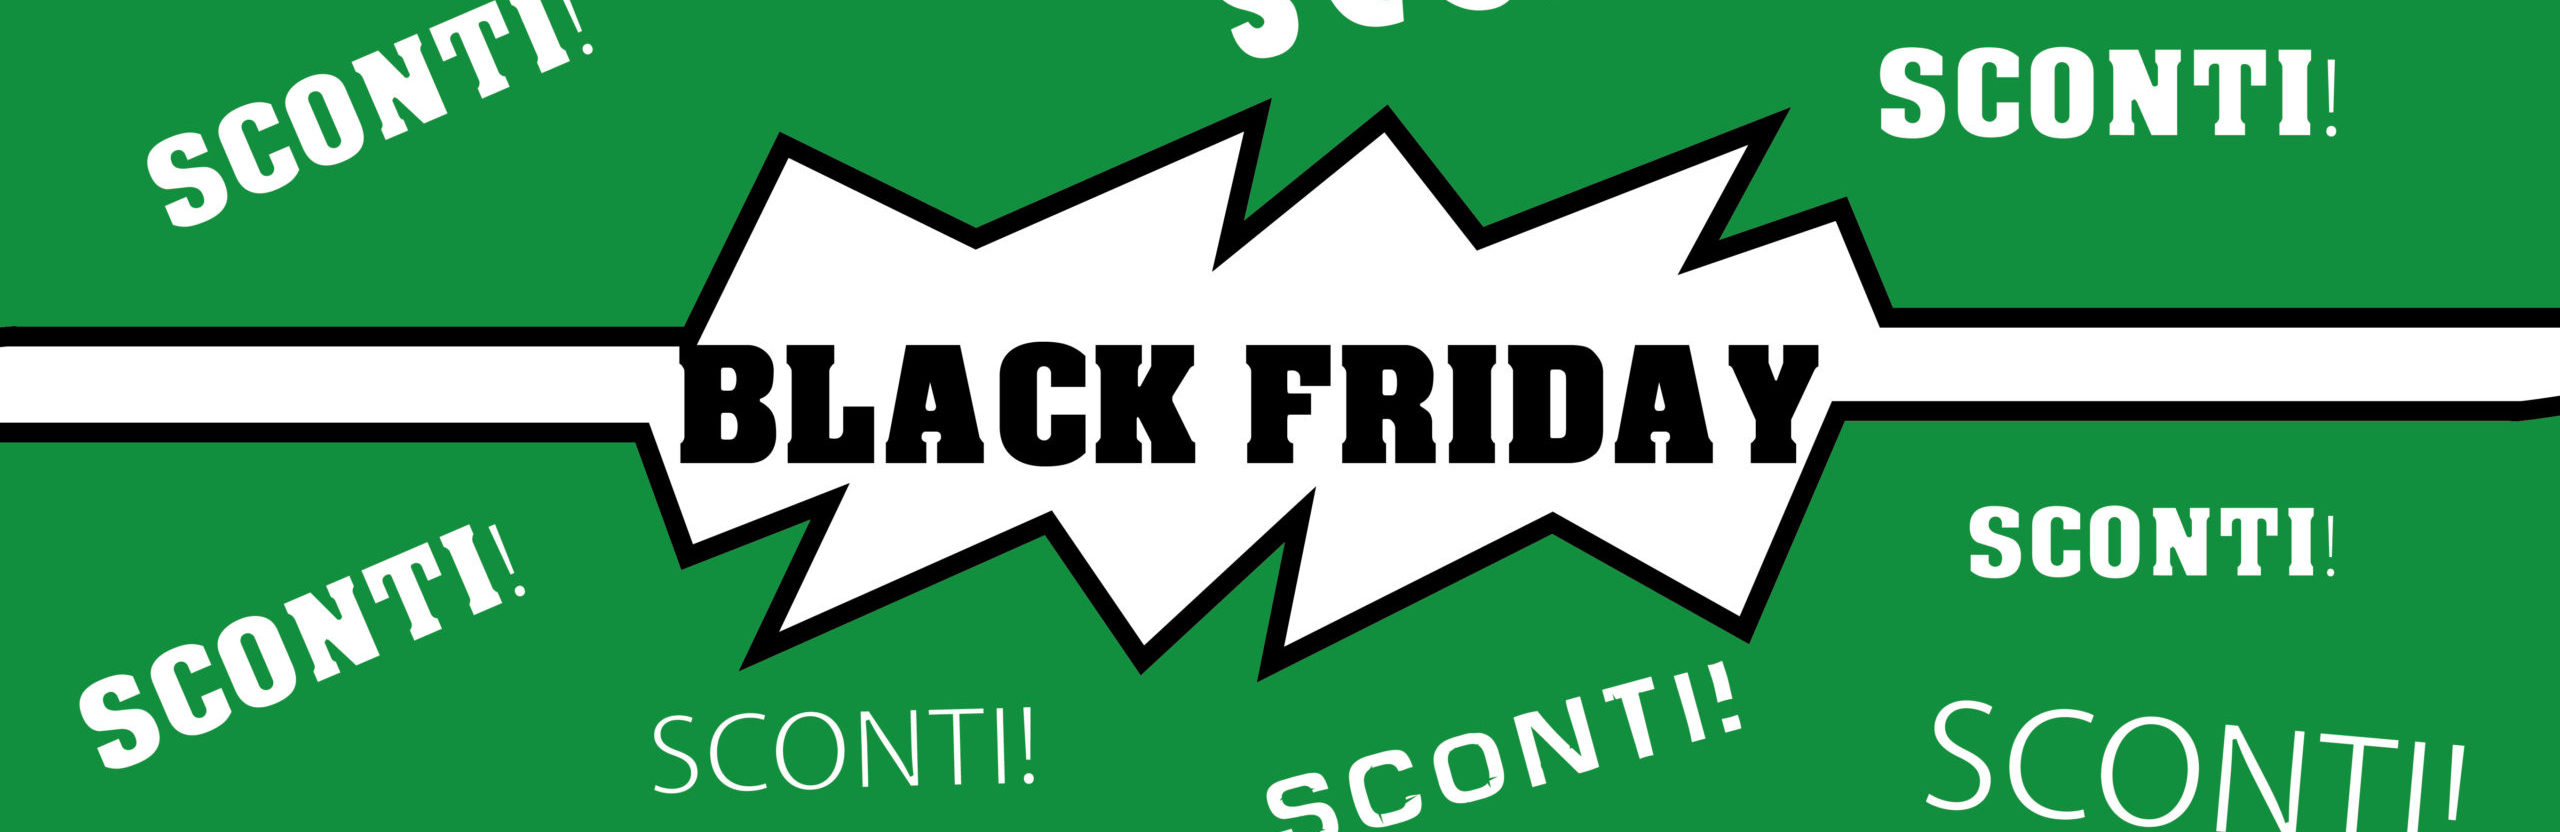 BLACK FRIDAY ROTA COMMERCIALE